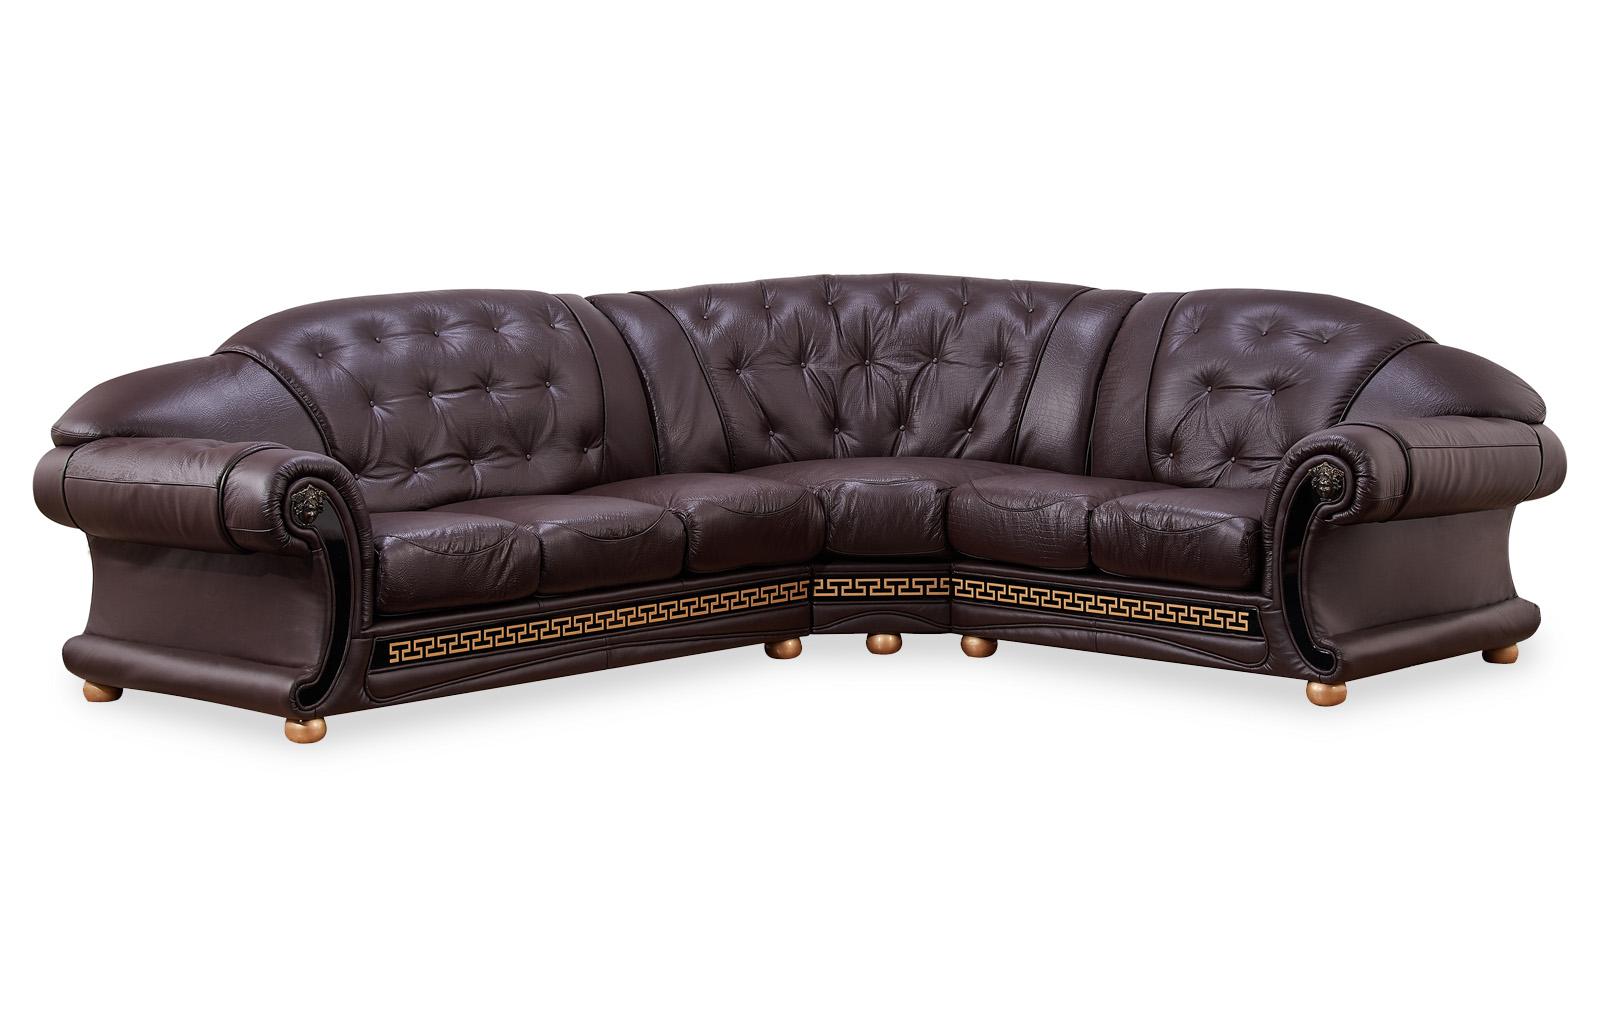 Classic Sectional Sofa Anais Anais RHC-BROWN in Brown Leather